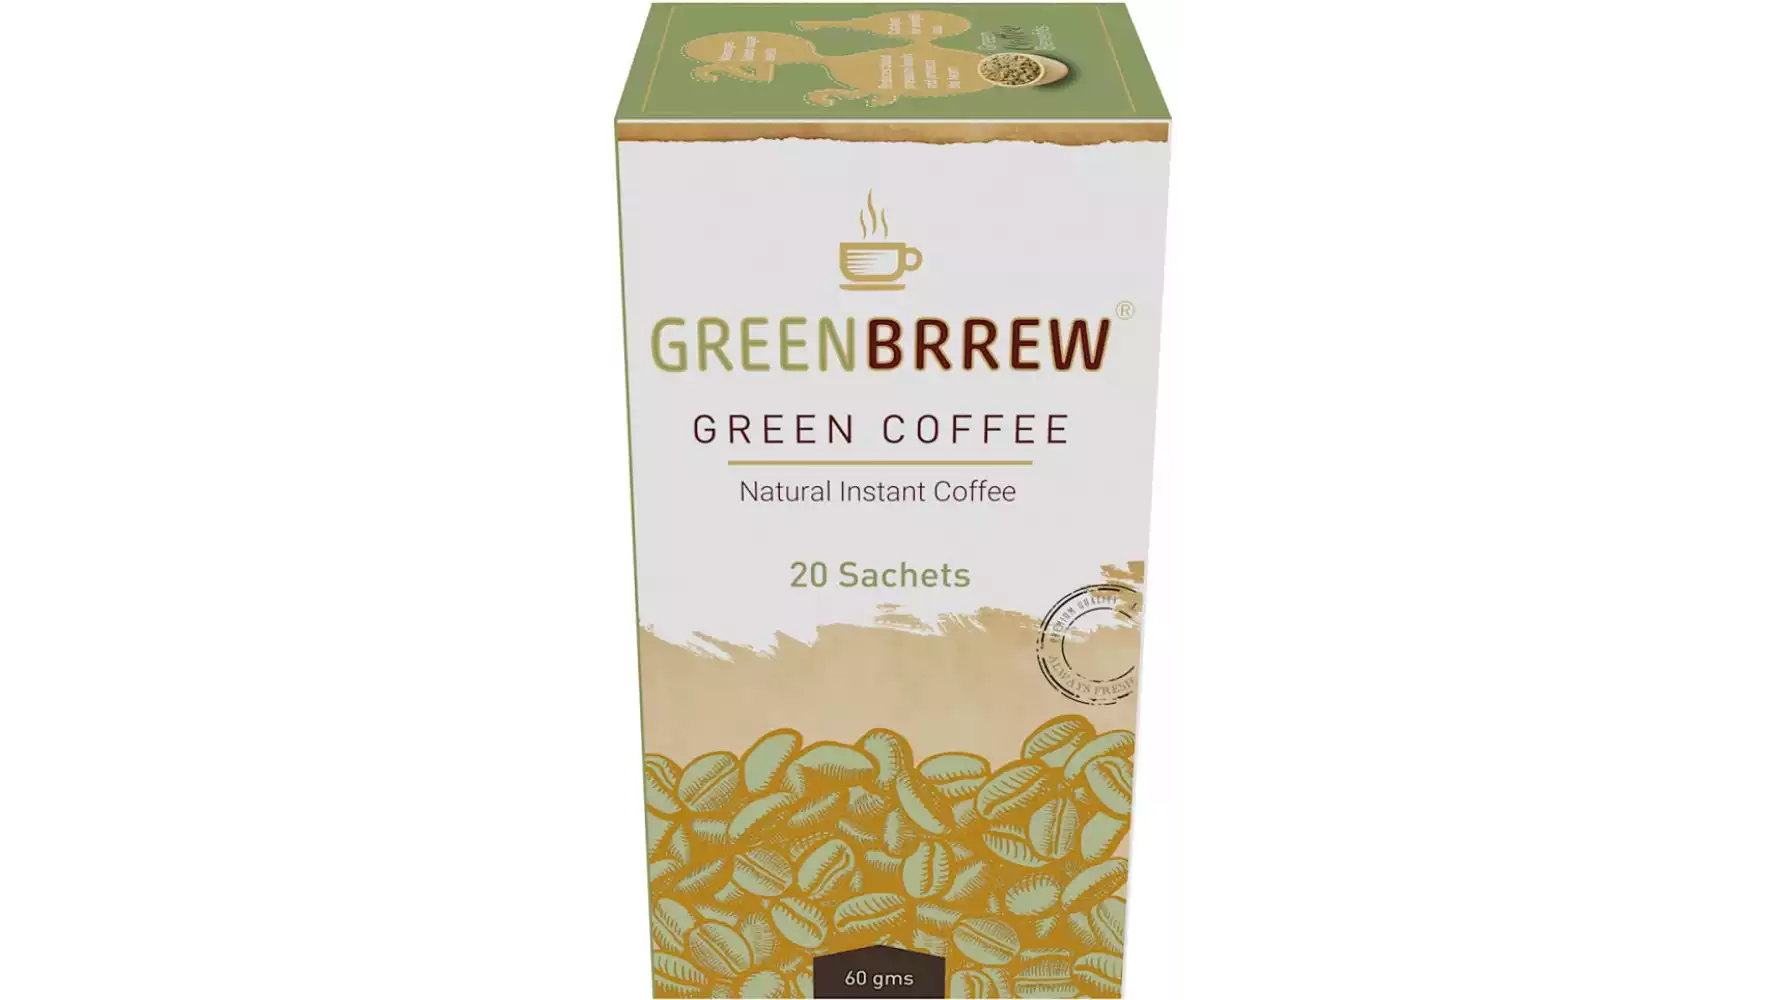 Greenbrrew Instant Green Coffee Natural (20Sachet)